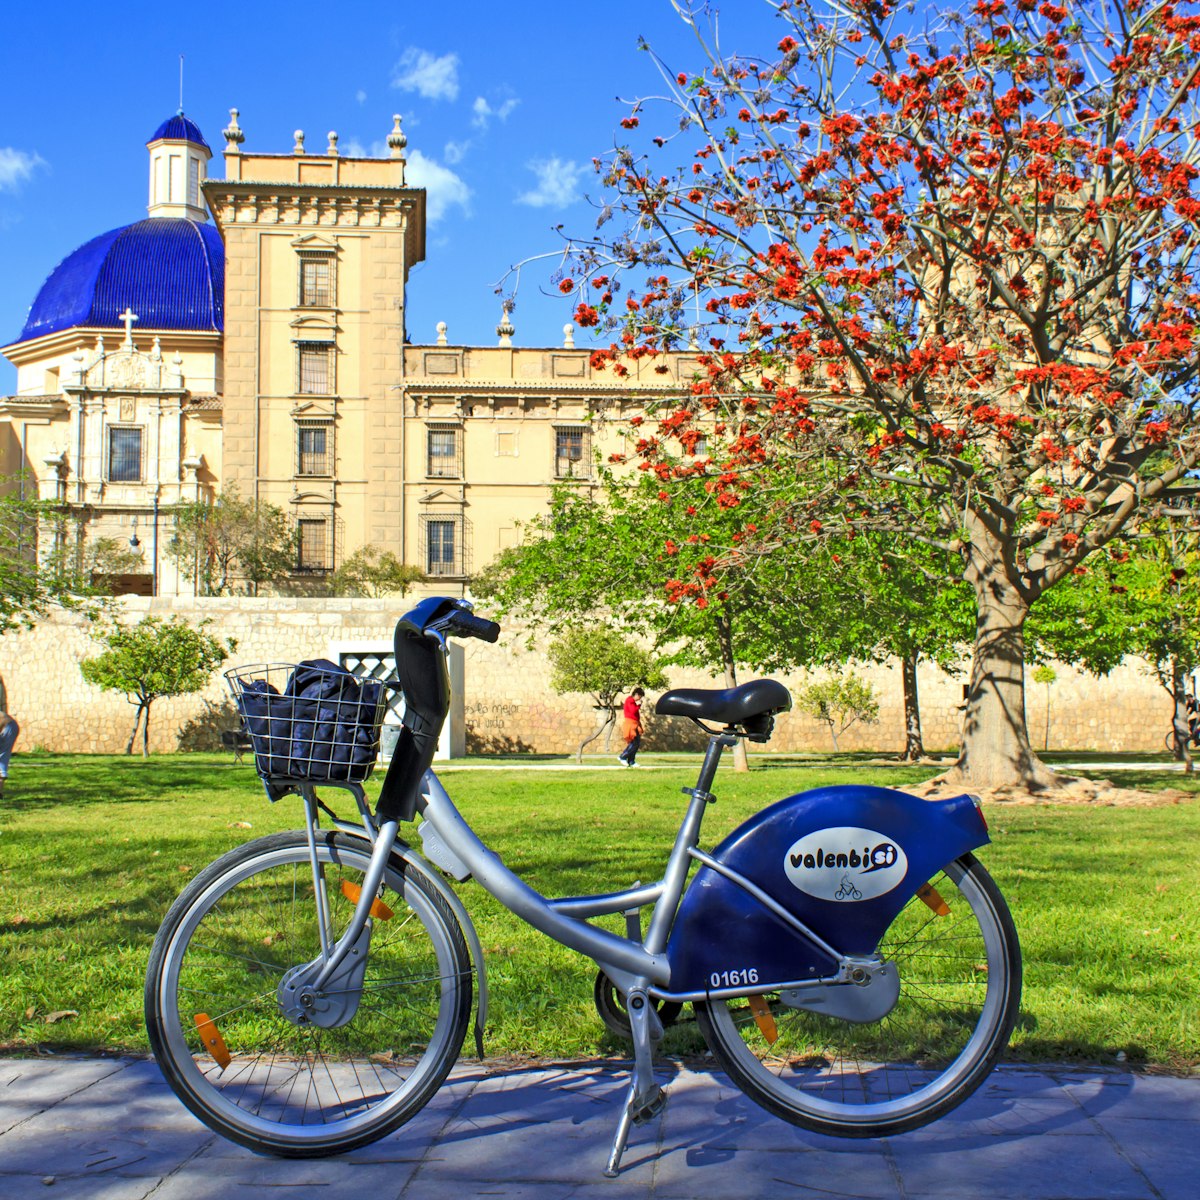 Valencia free rental city bicycle "Valenbisi" in front of the Museum of fine arts  in Valencia, Spain